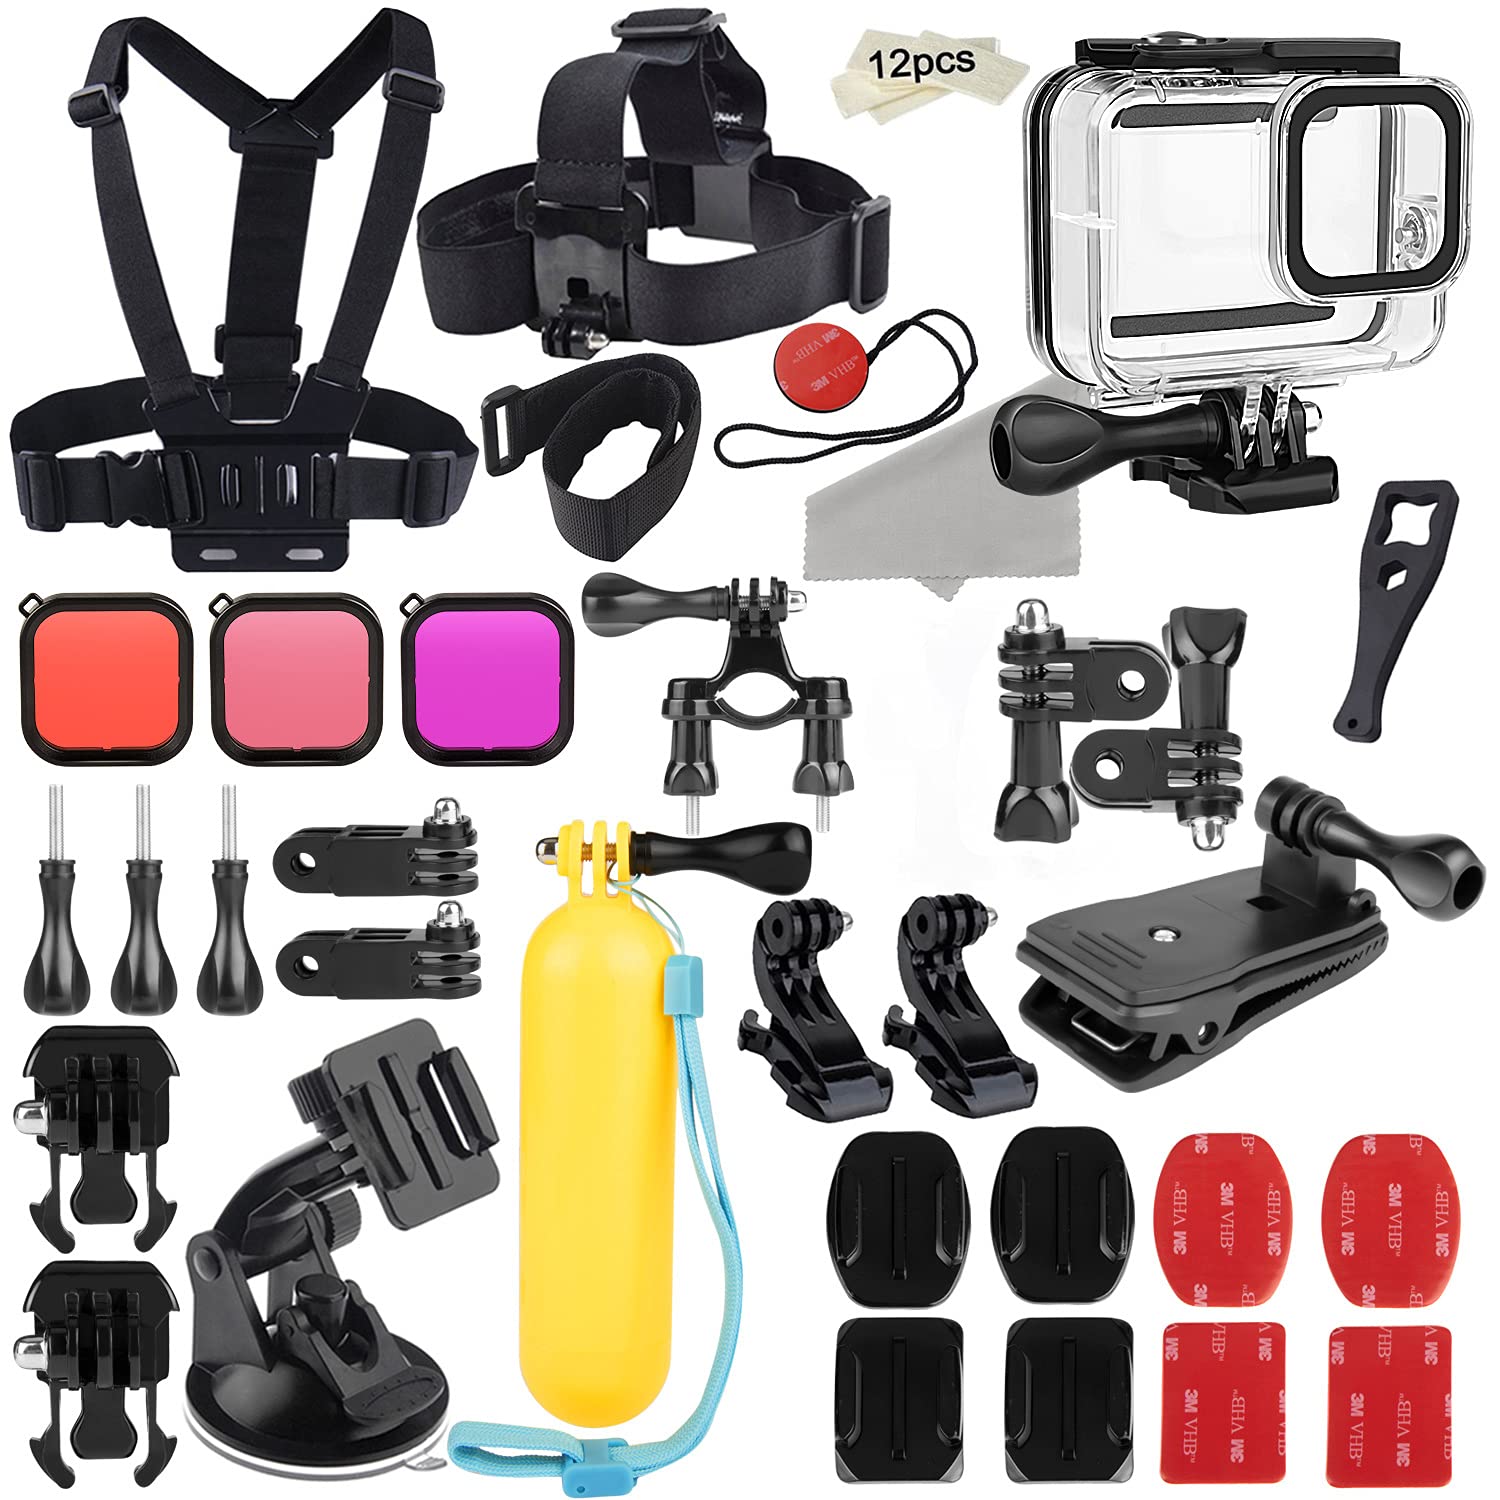 Vant til patrulje minimum 52-in-1 Accessories Kit Compatible with GoPro Hero 8 Black, Waterproof  Housing Case + Filters + Head Chest Strap + Suction Cup Mount + Bicycle  Mount + Floating Grip Accessories for Gopro 8 Black